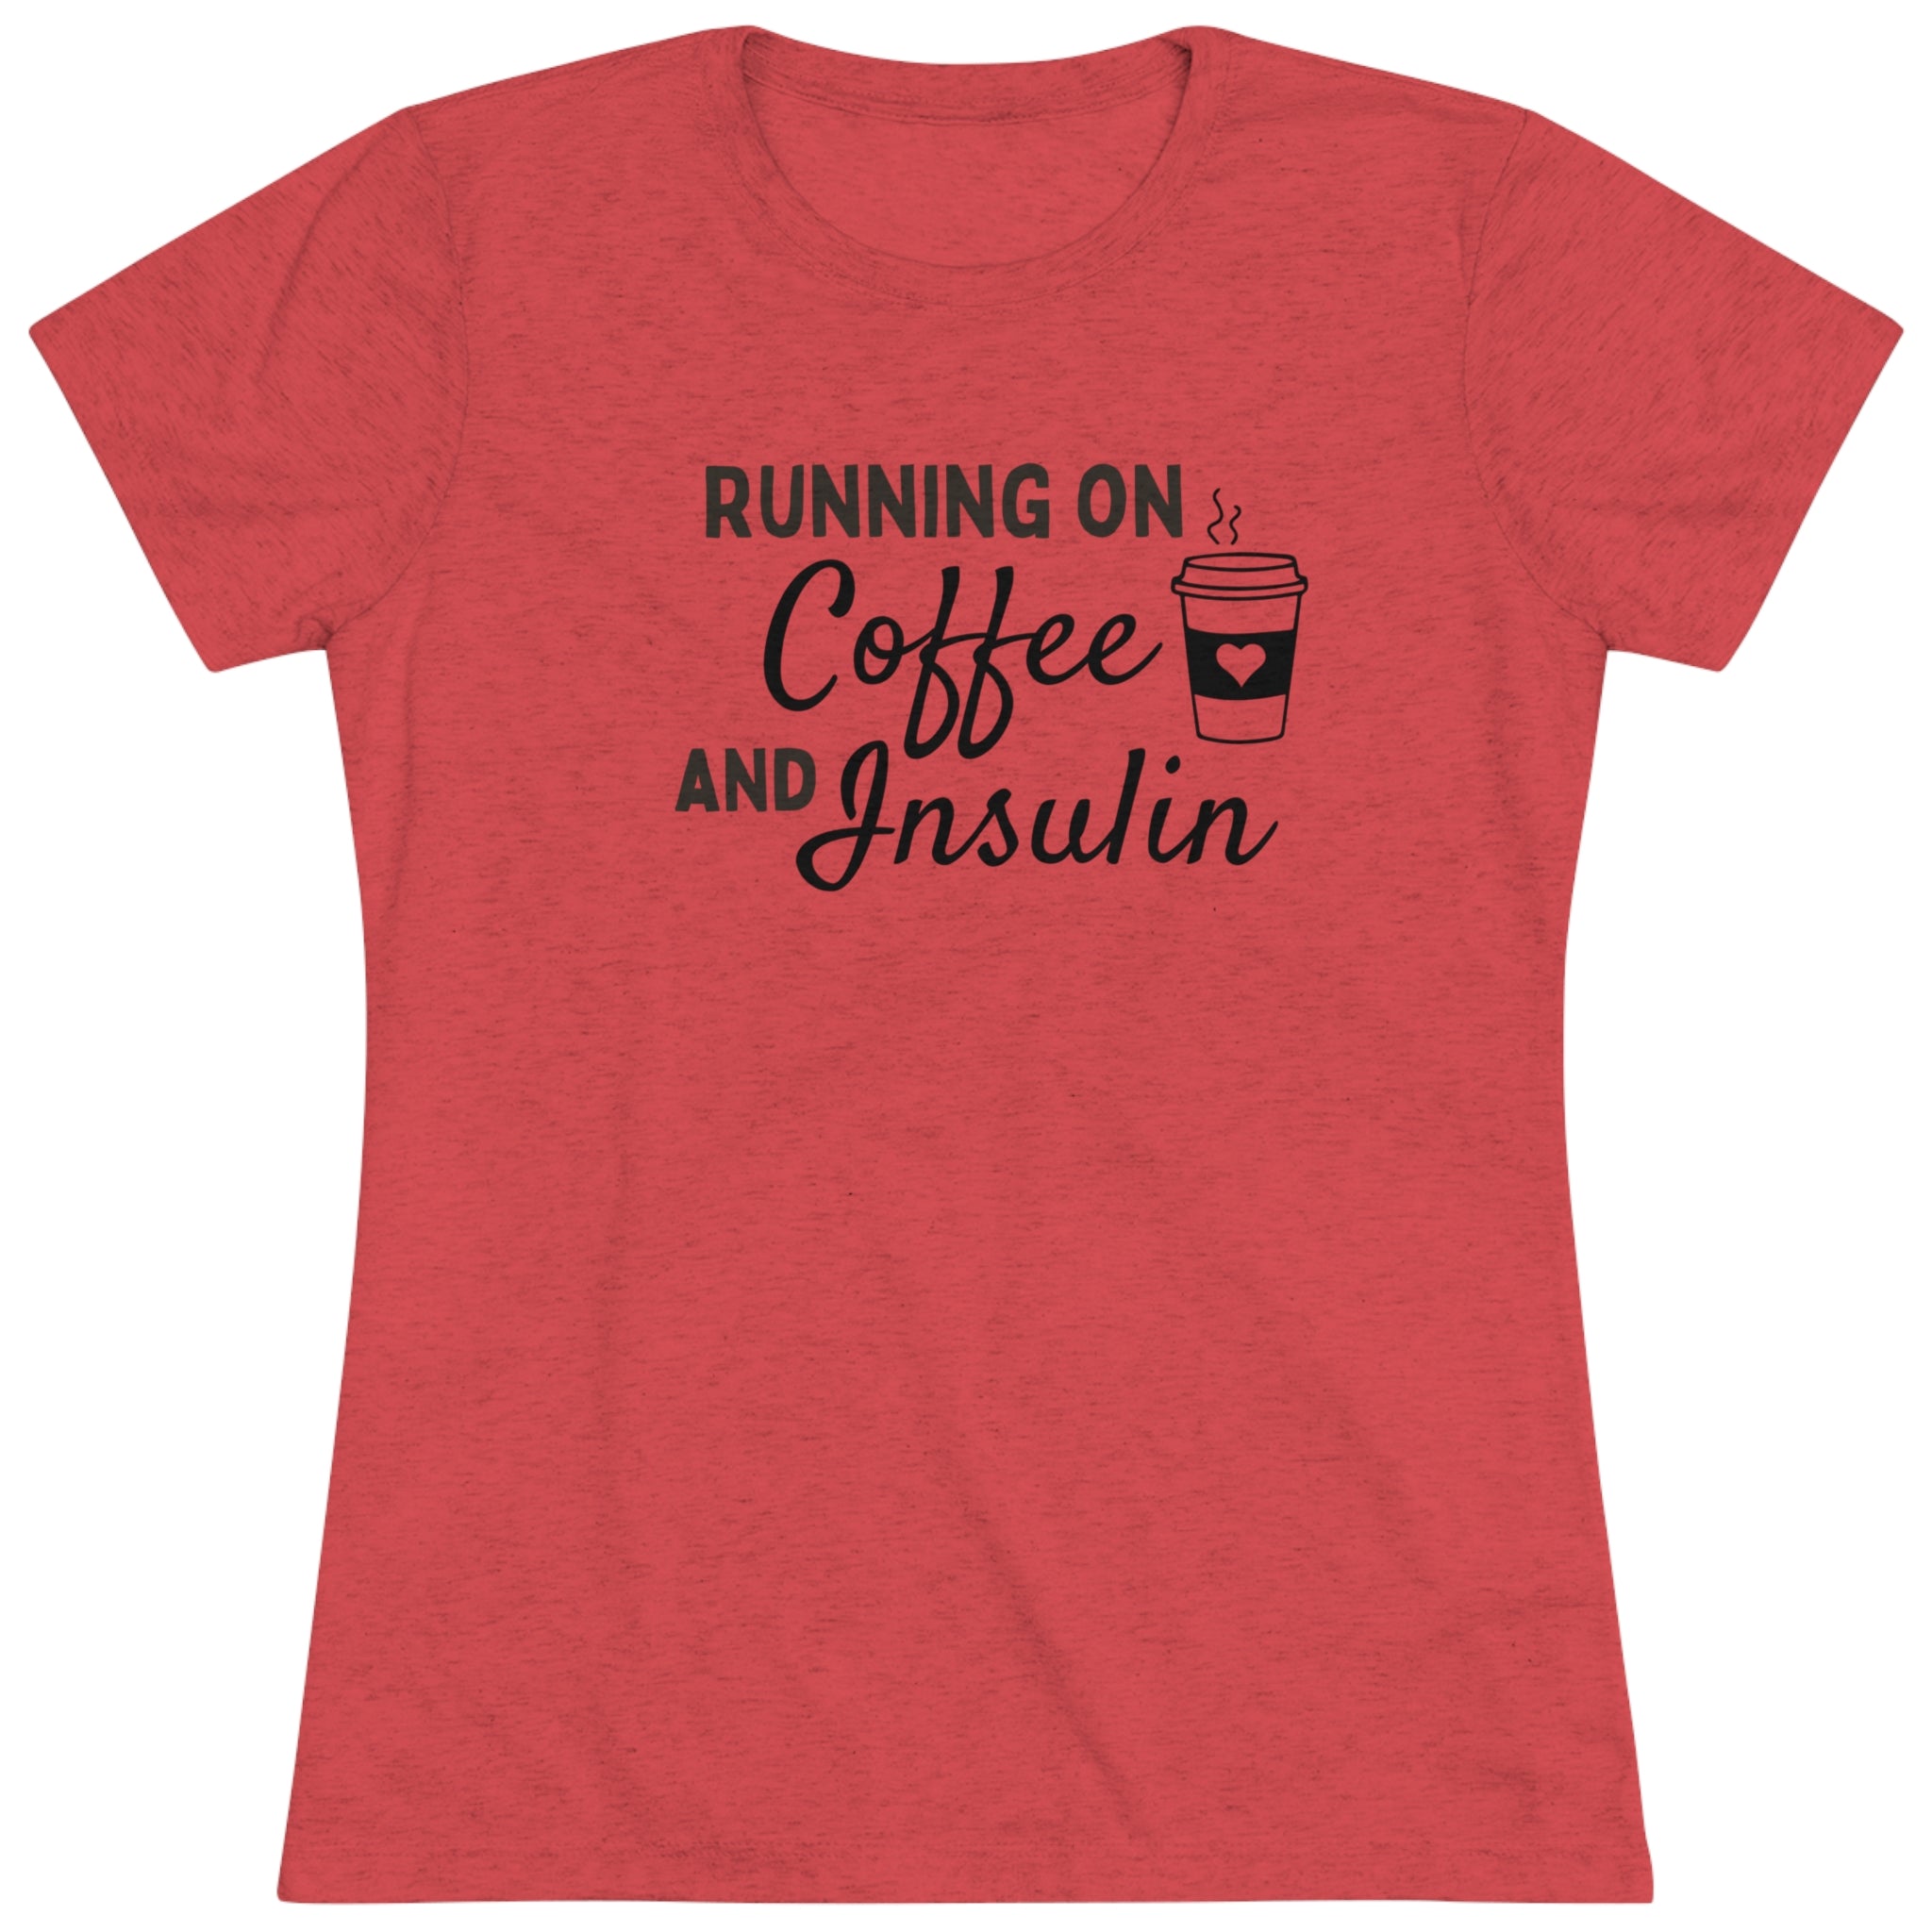 Women's Super Soft T1D Coffee and Insulin Short Sleeve Graphic Tee